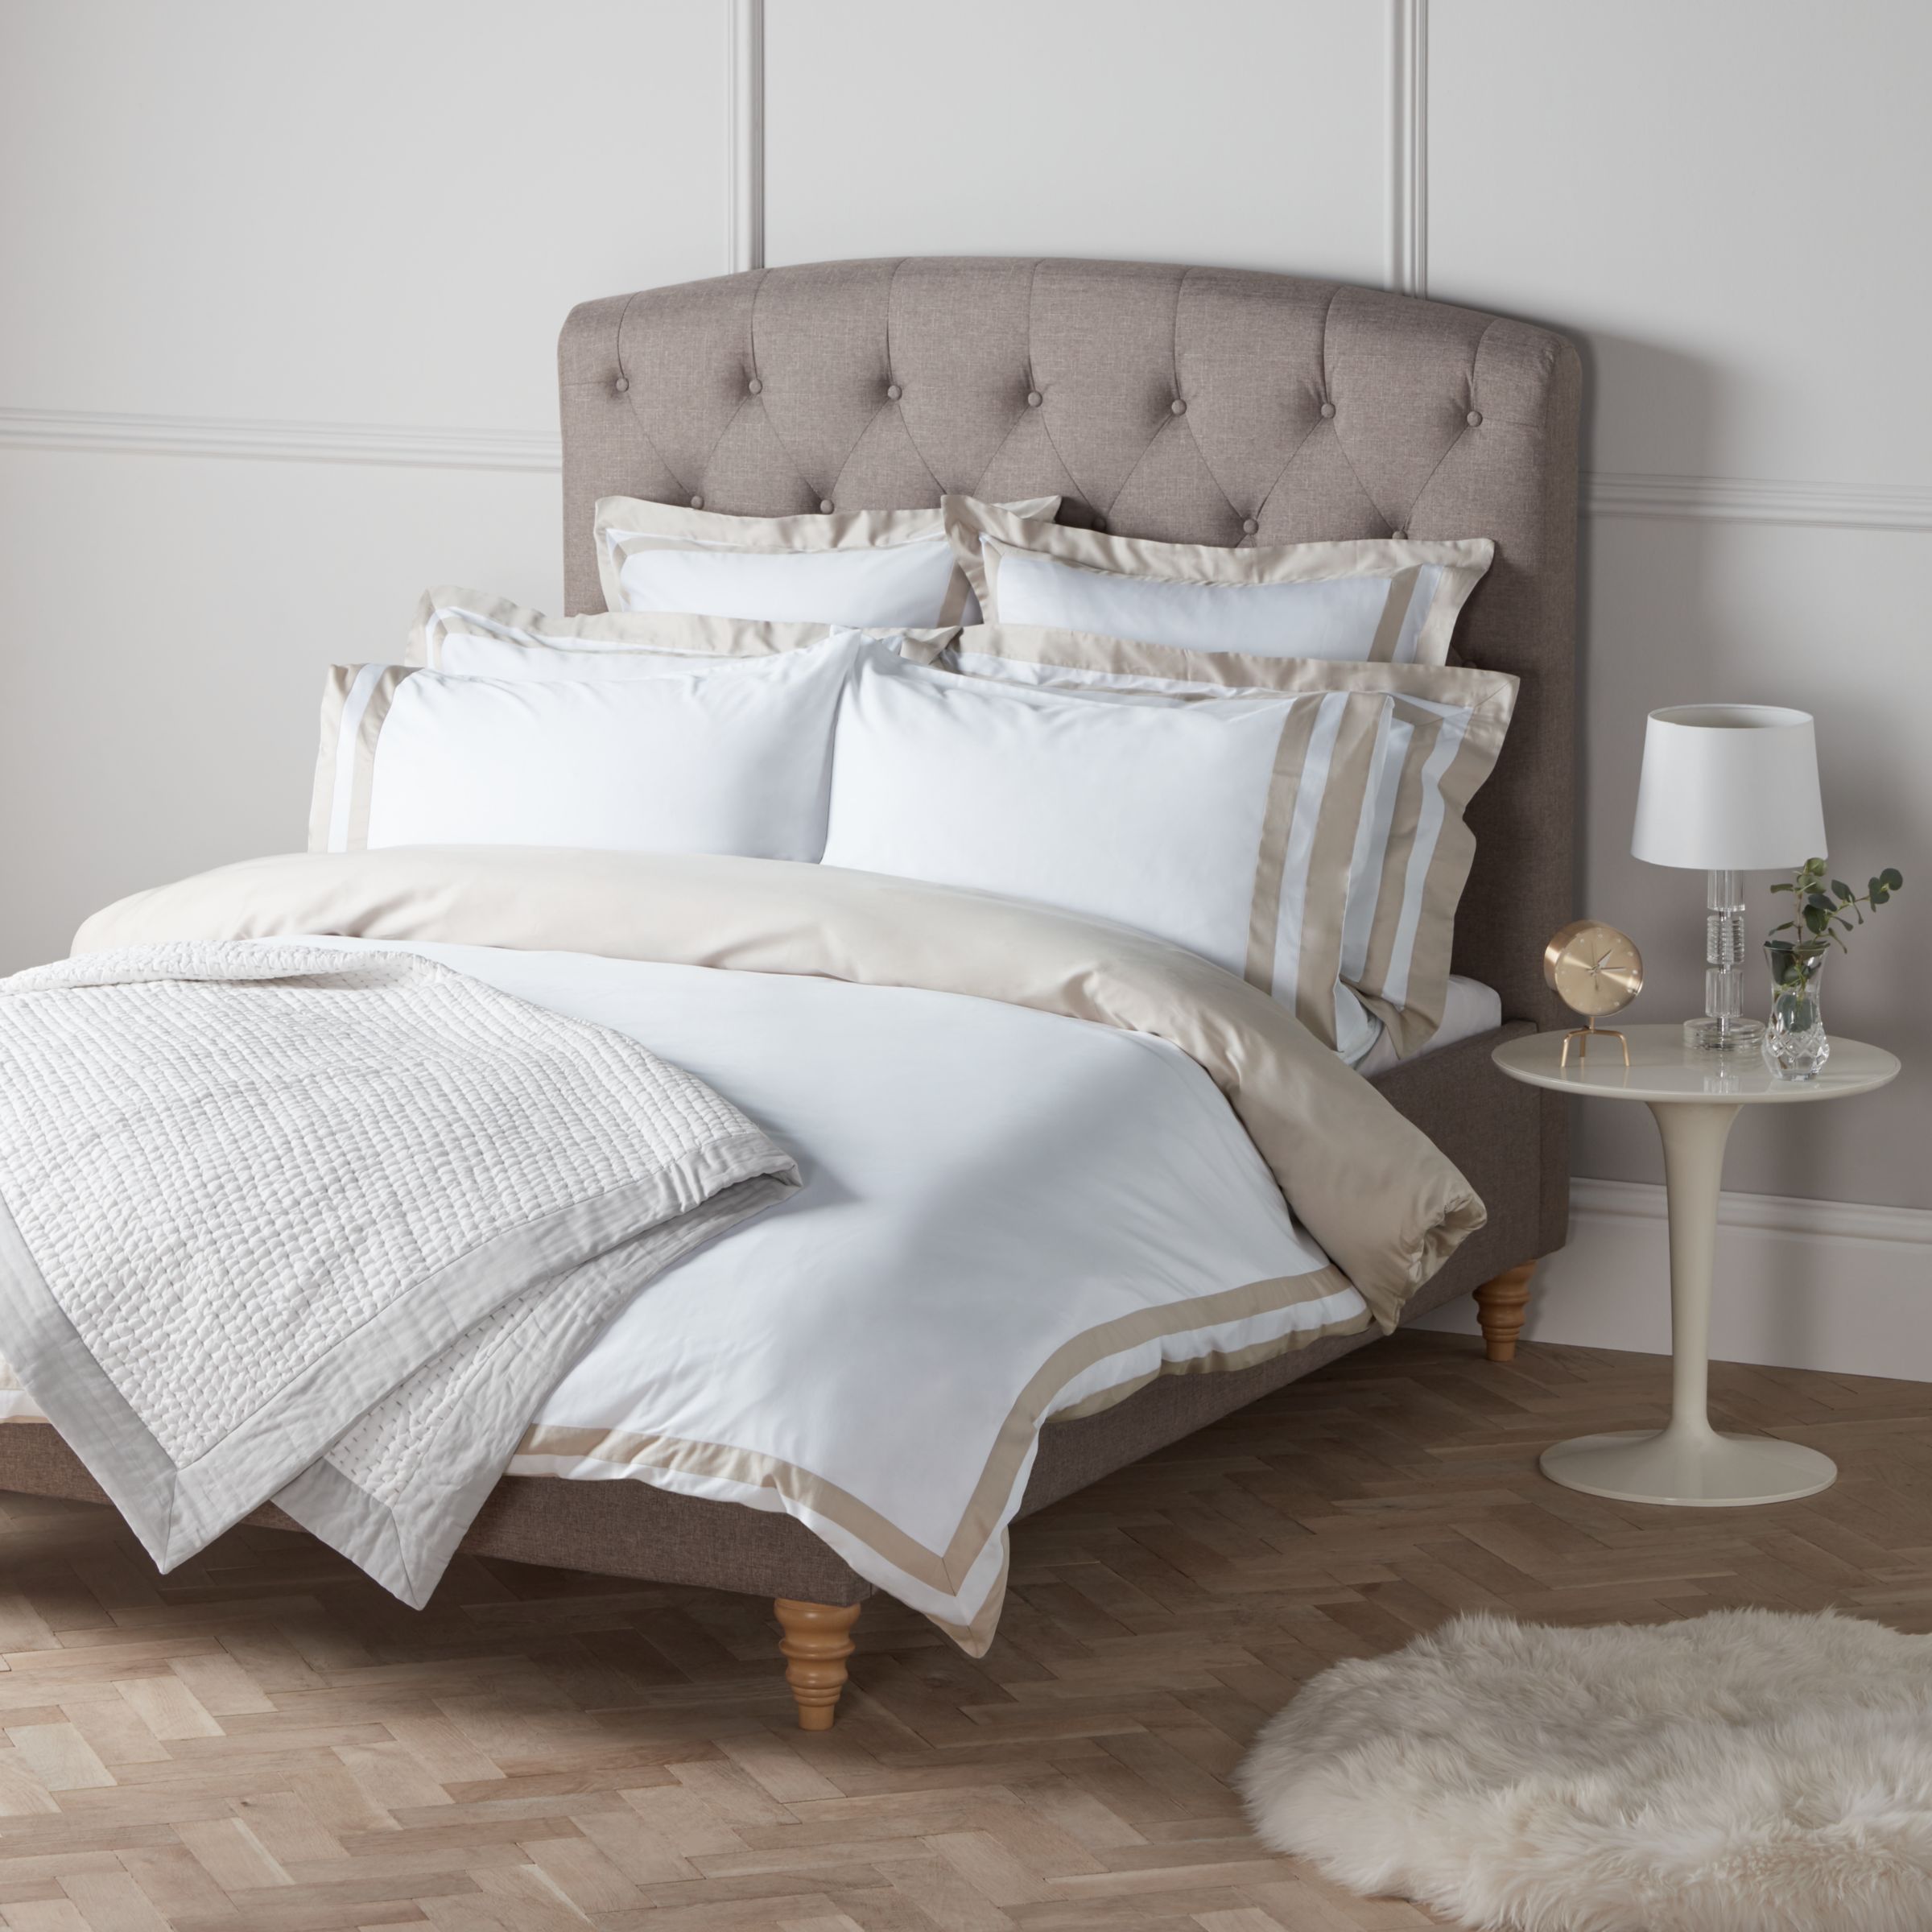 John Lewis & Partners Soft and Silky Ascot Cotton Satin Bedding